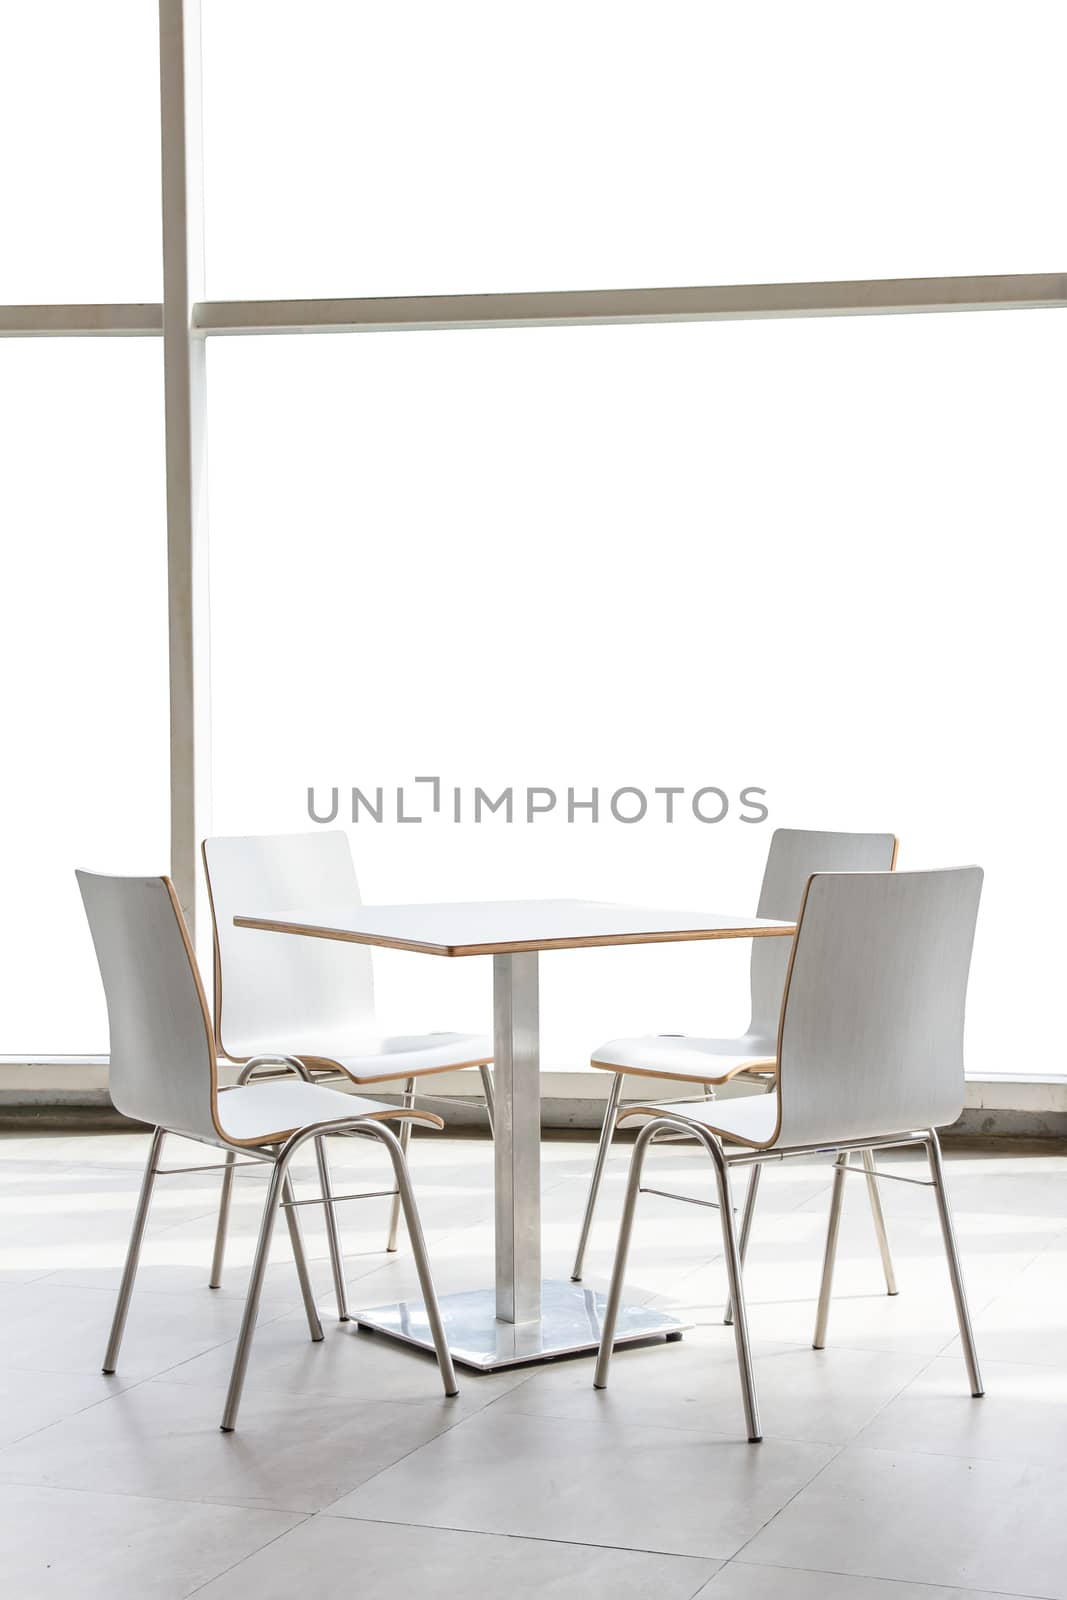 tables and chairs set on floor isolated on white background